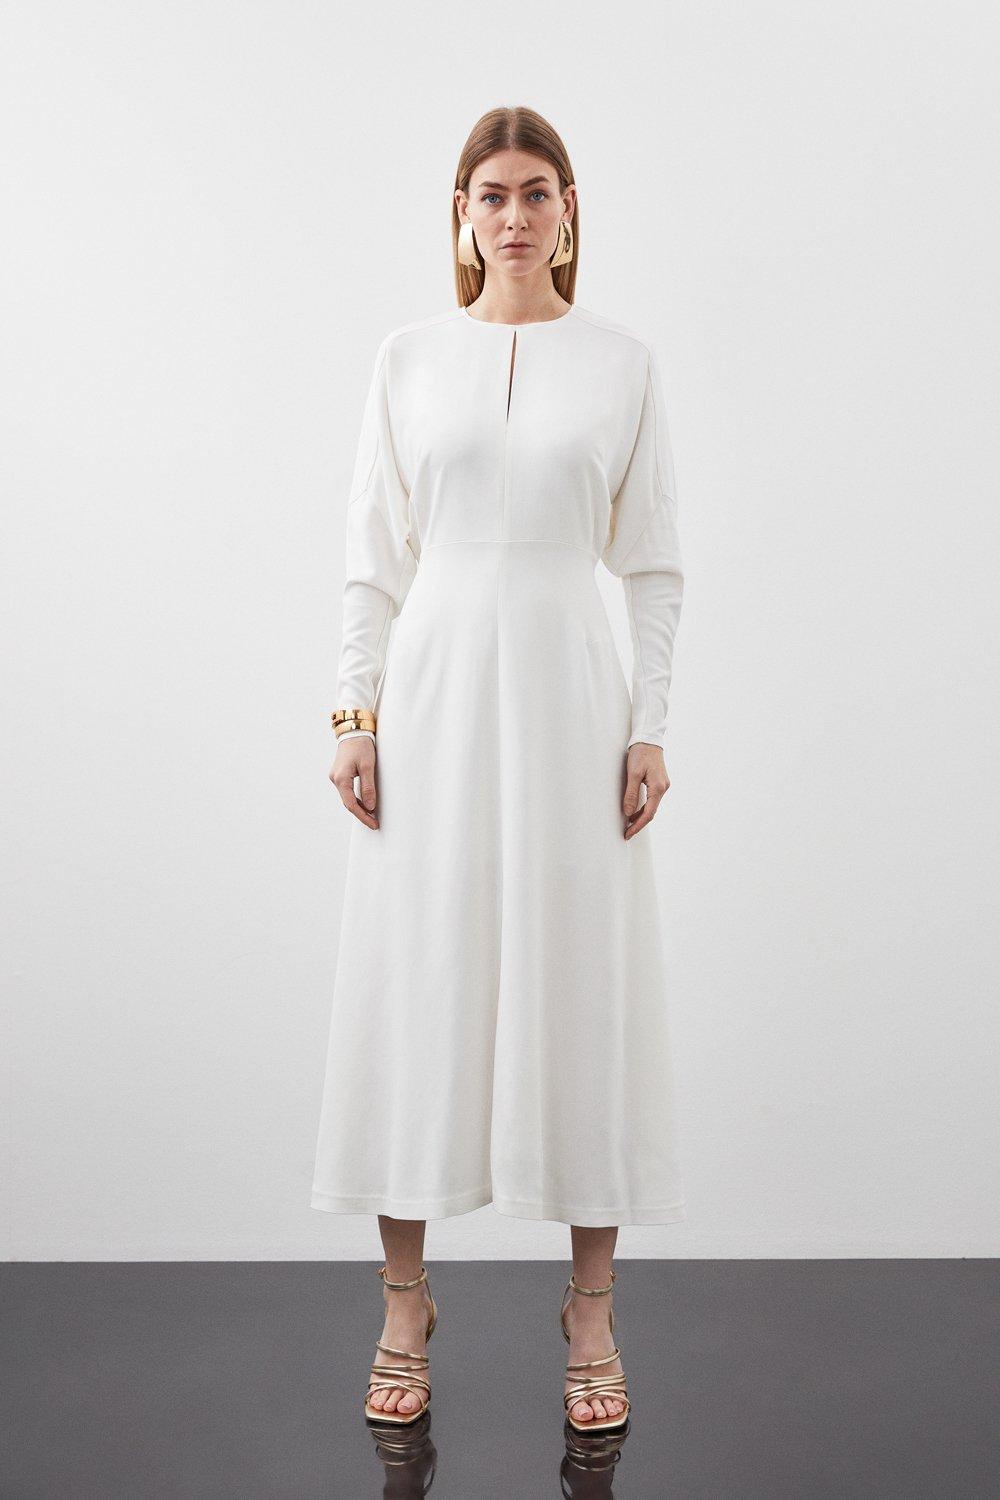 Confirmation Outfits | Confirmation Dresses for Mothers & Guests ...